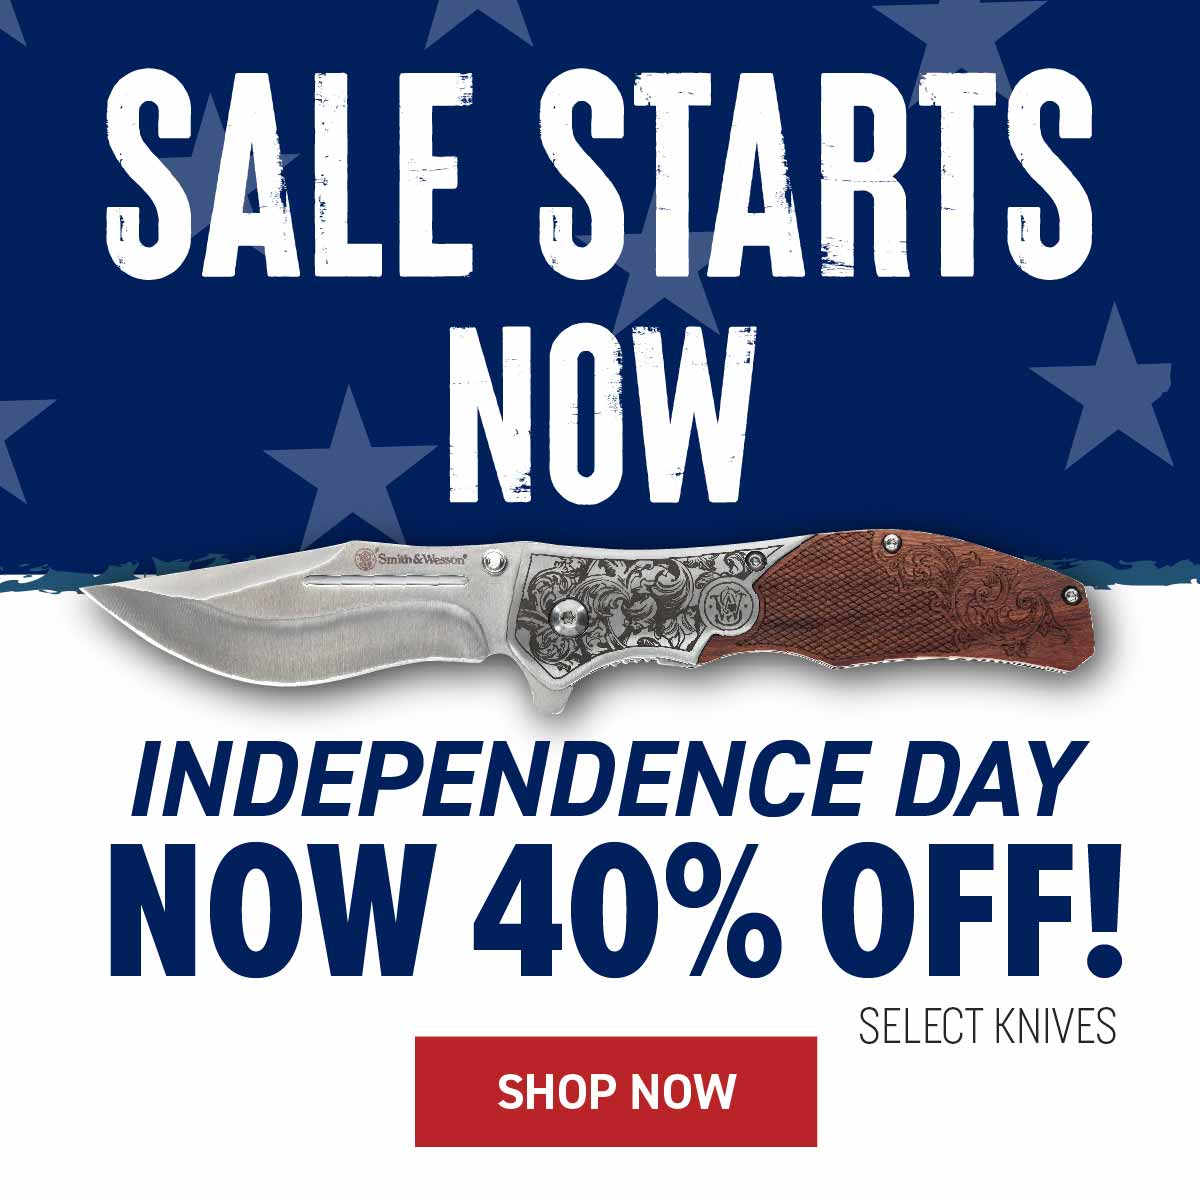 sale starts now, independence day now 40% off select knives, shop now